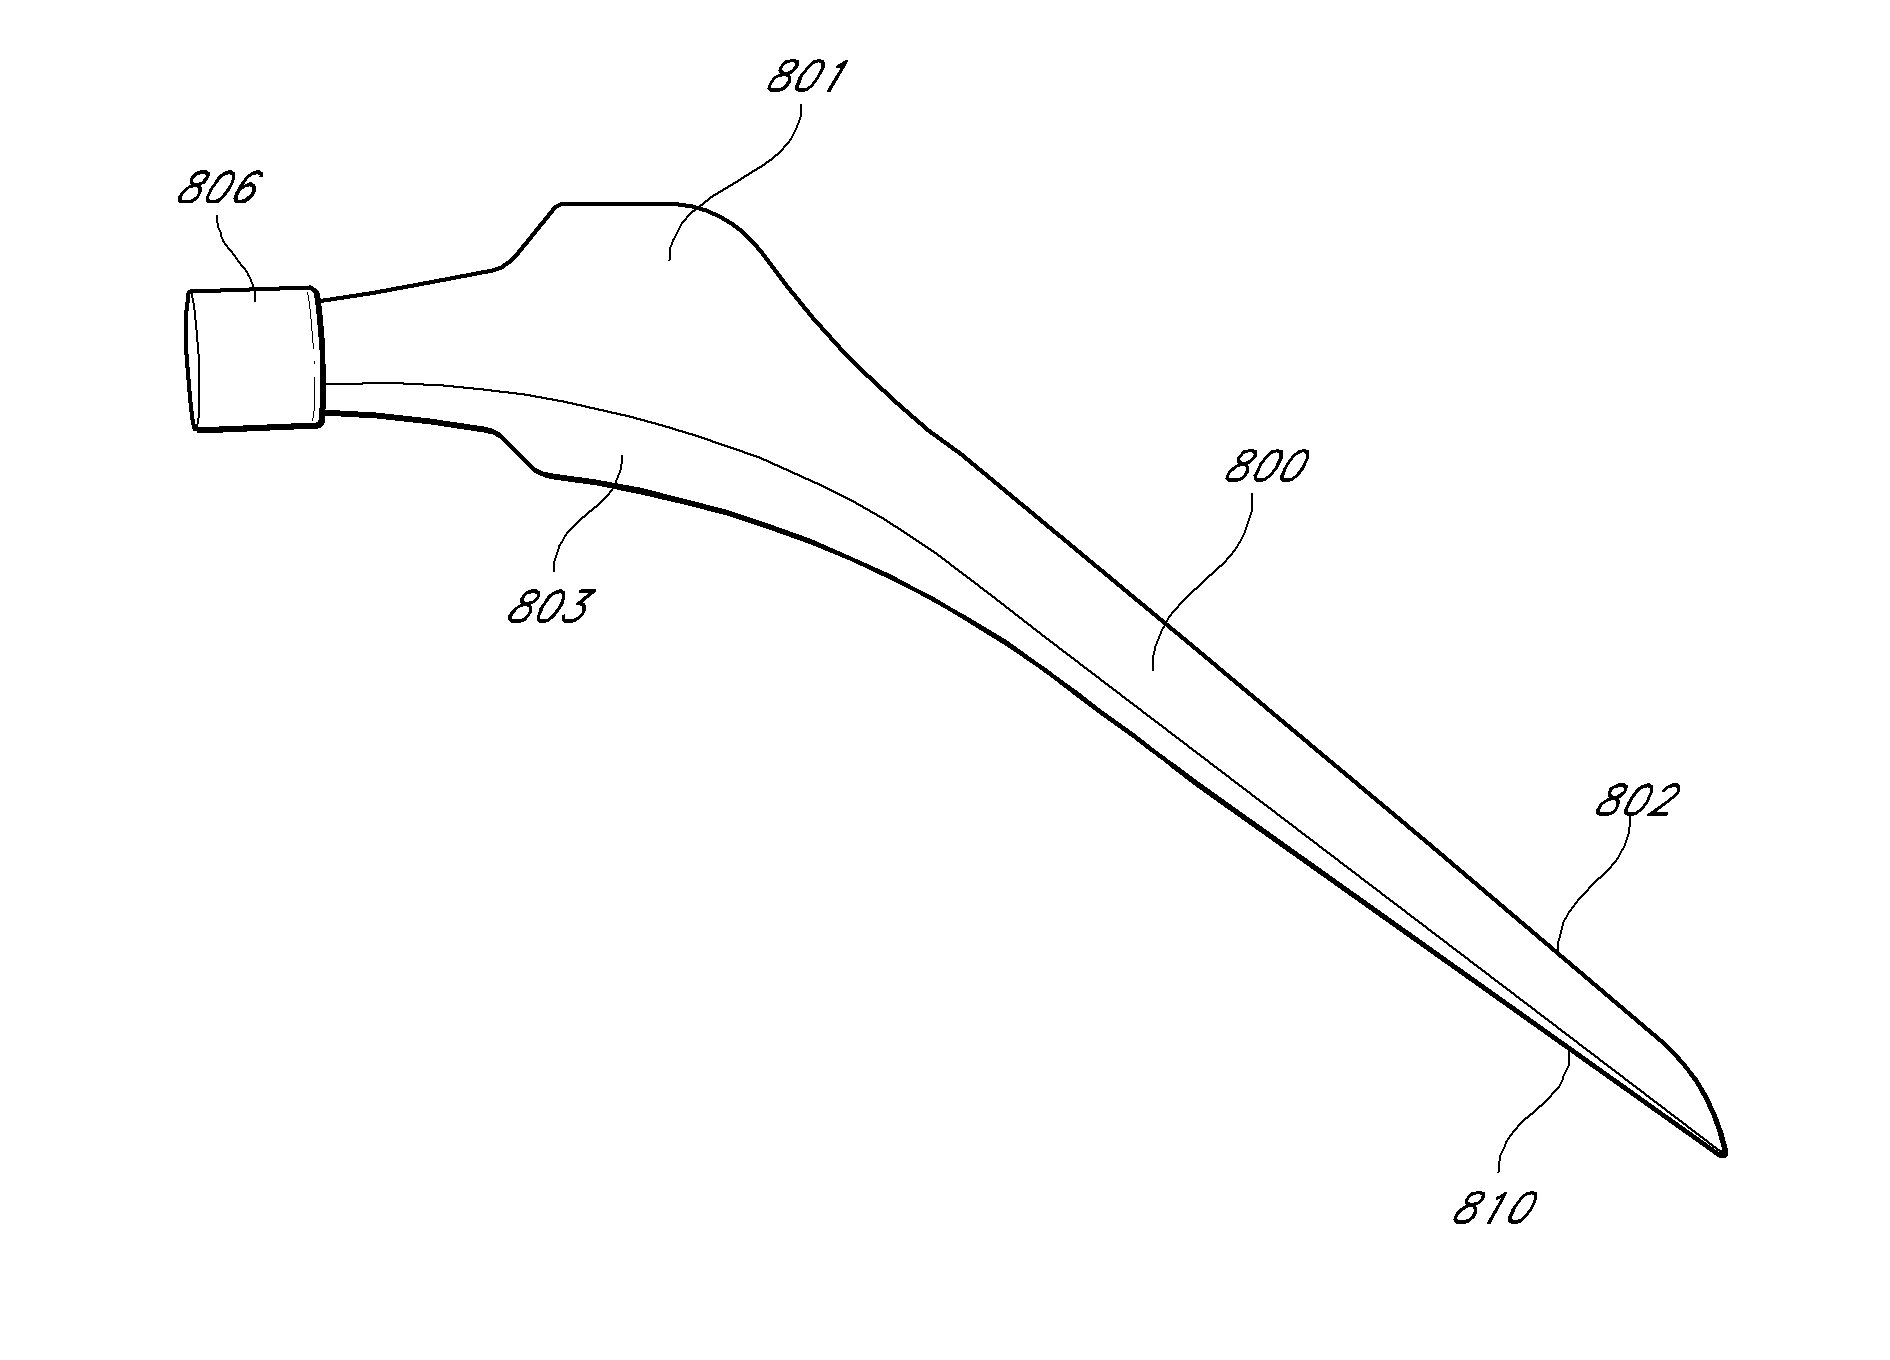 Stem for use in joint arthroplasty